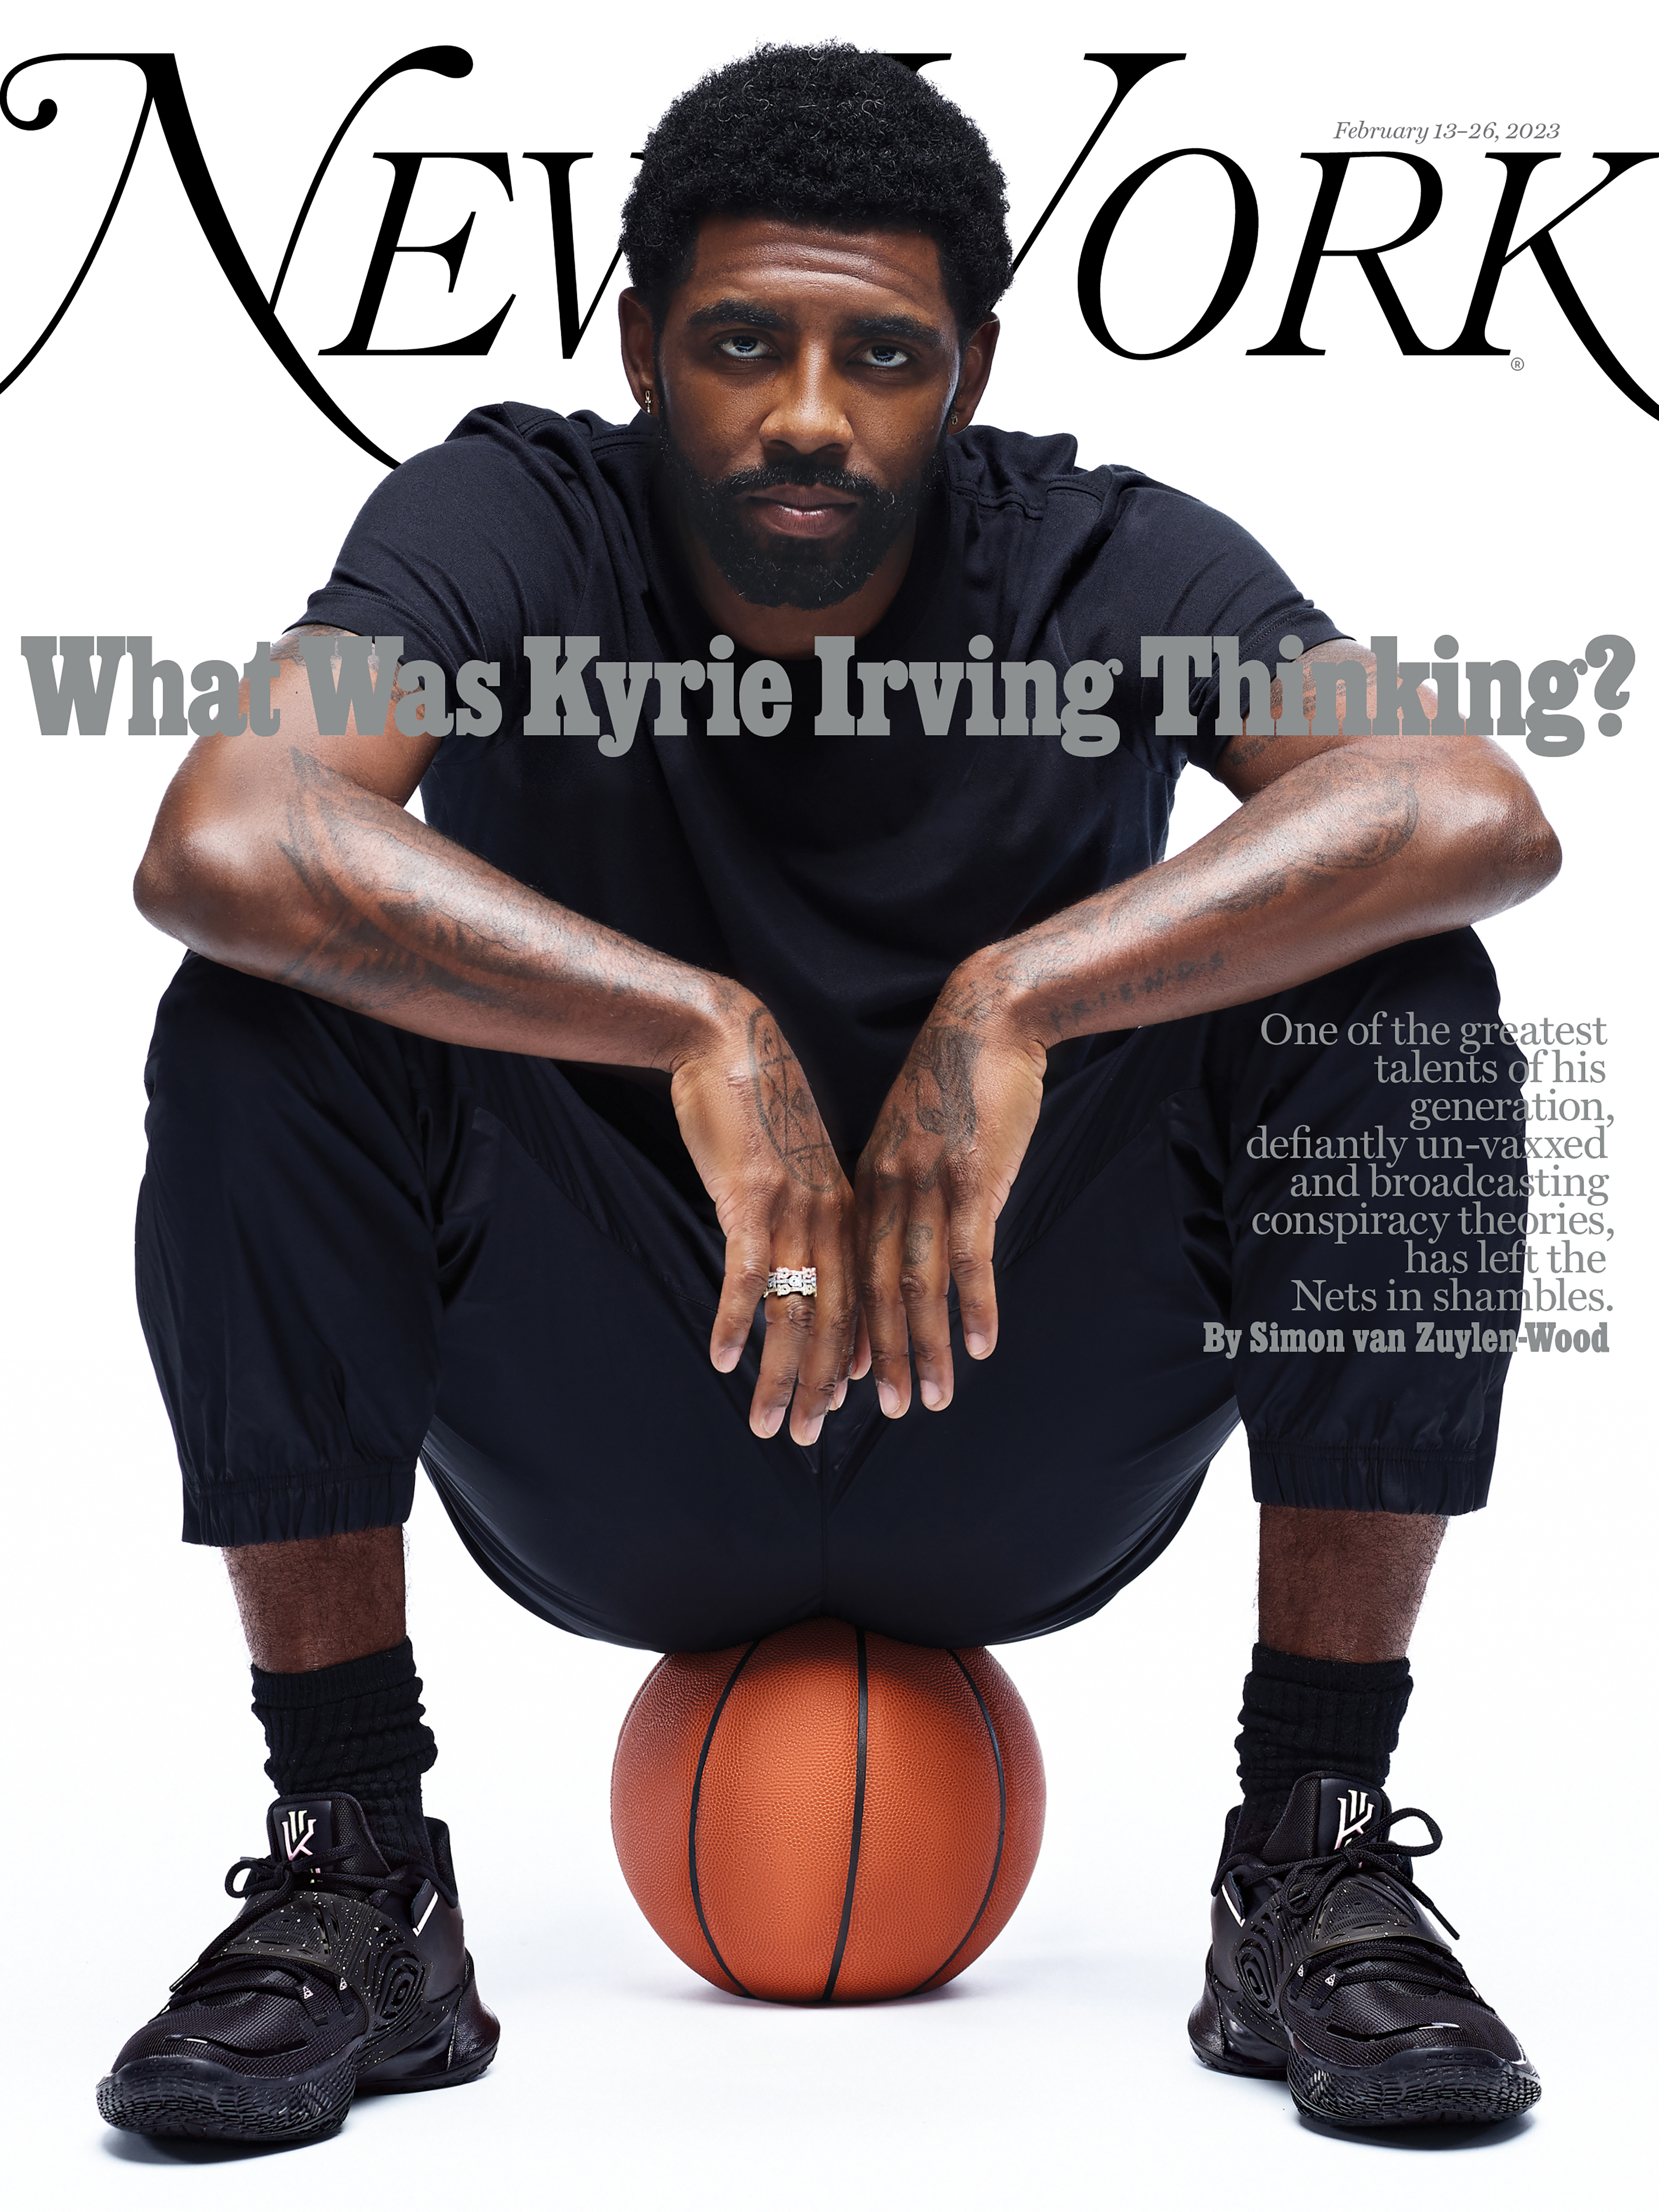 New York - “What Was Kyrie Irving Thinking?," February 13-26, 2023